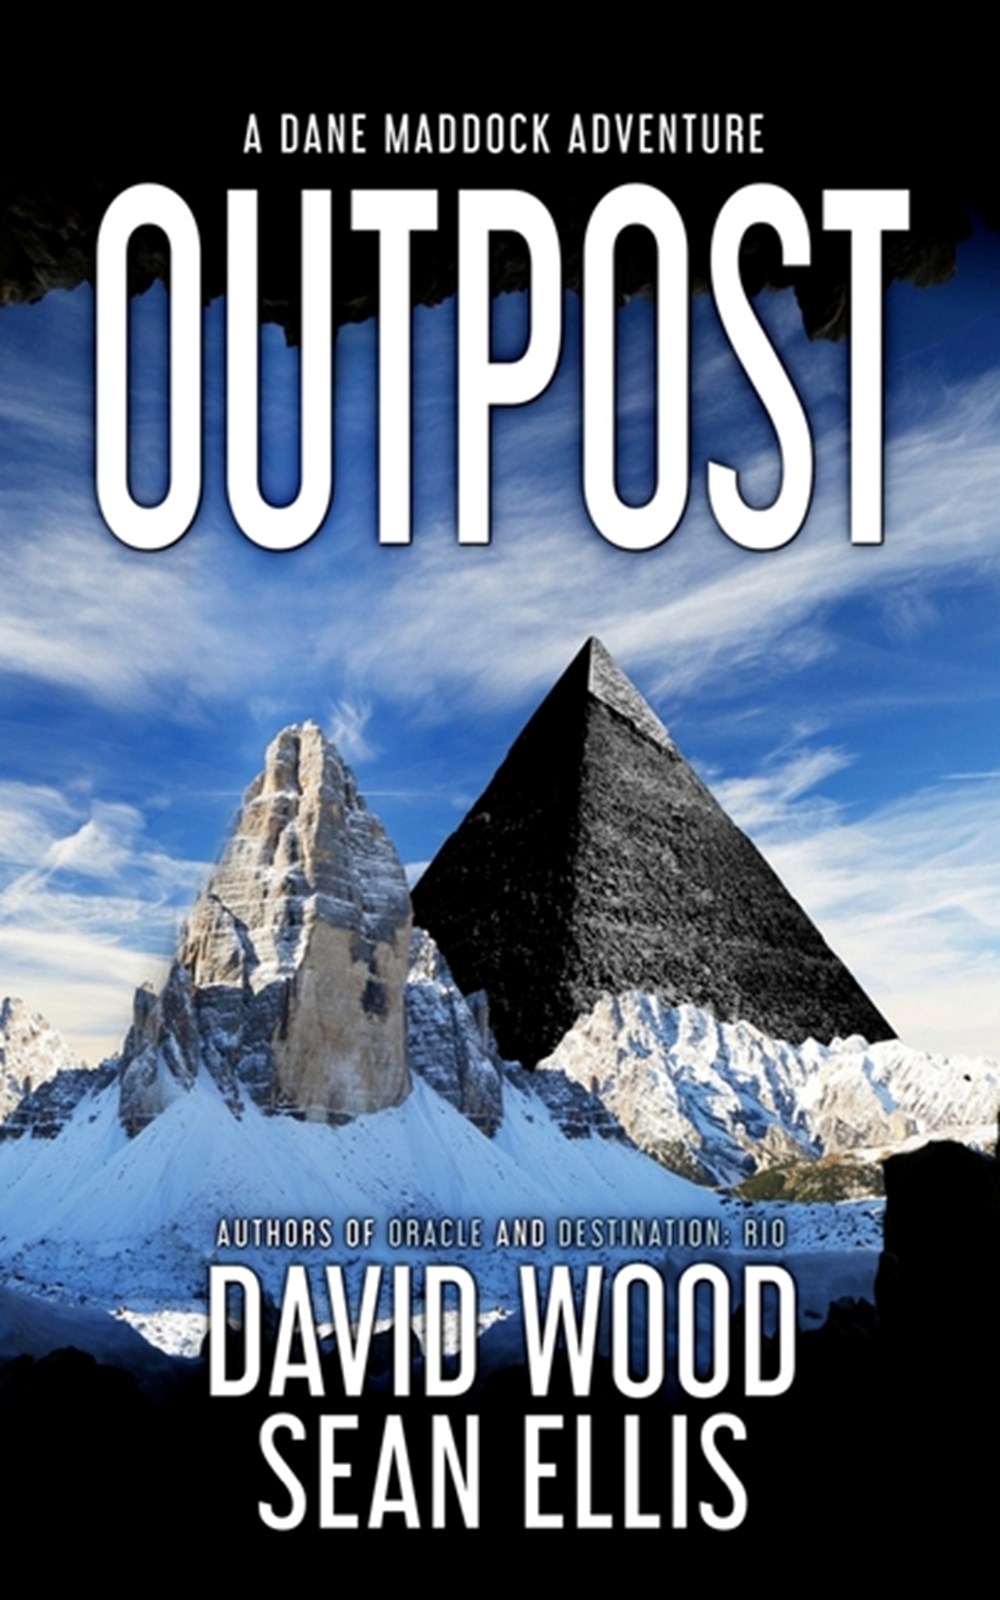 Outpost: A Dane Maddock Adventure